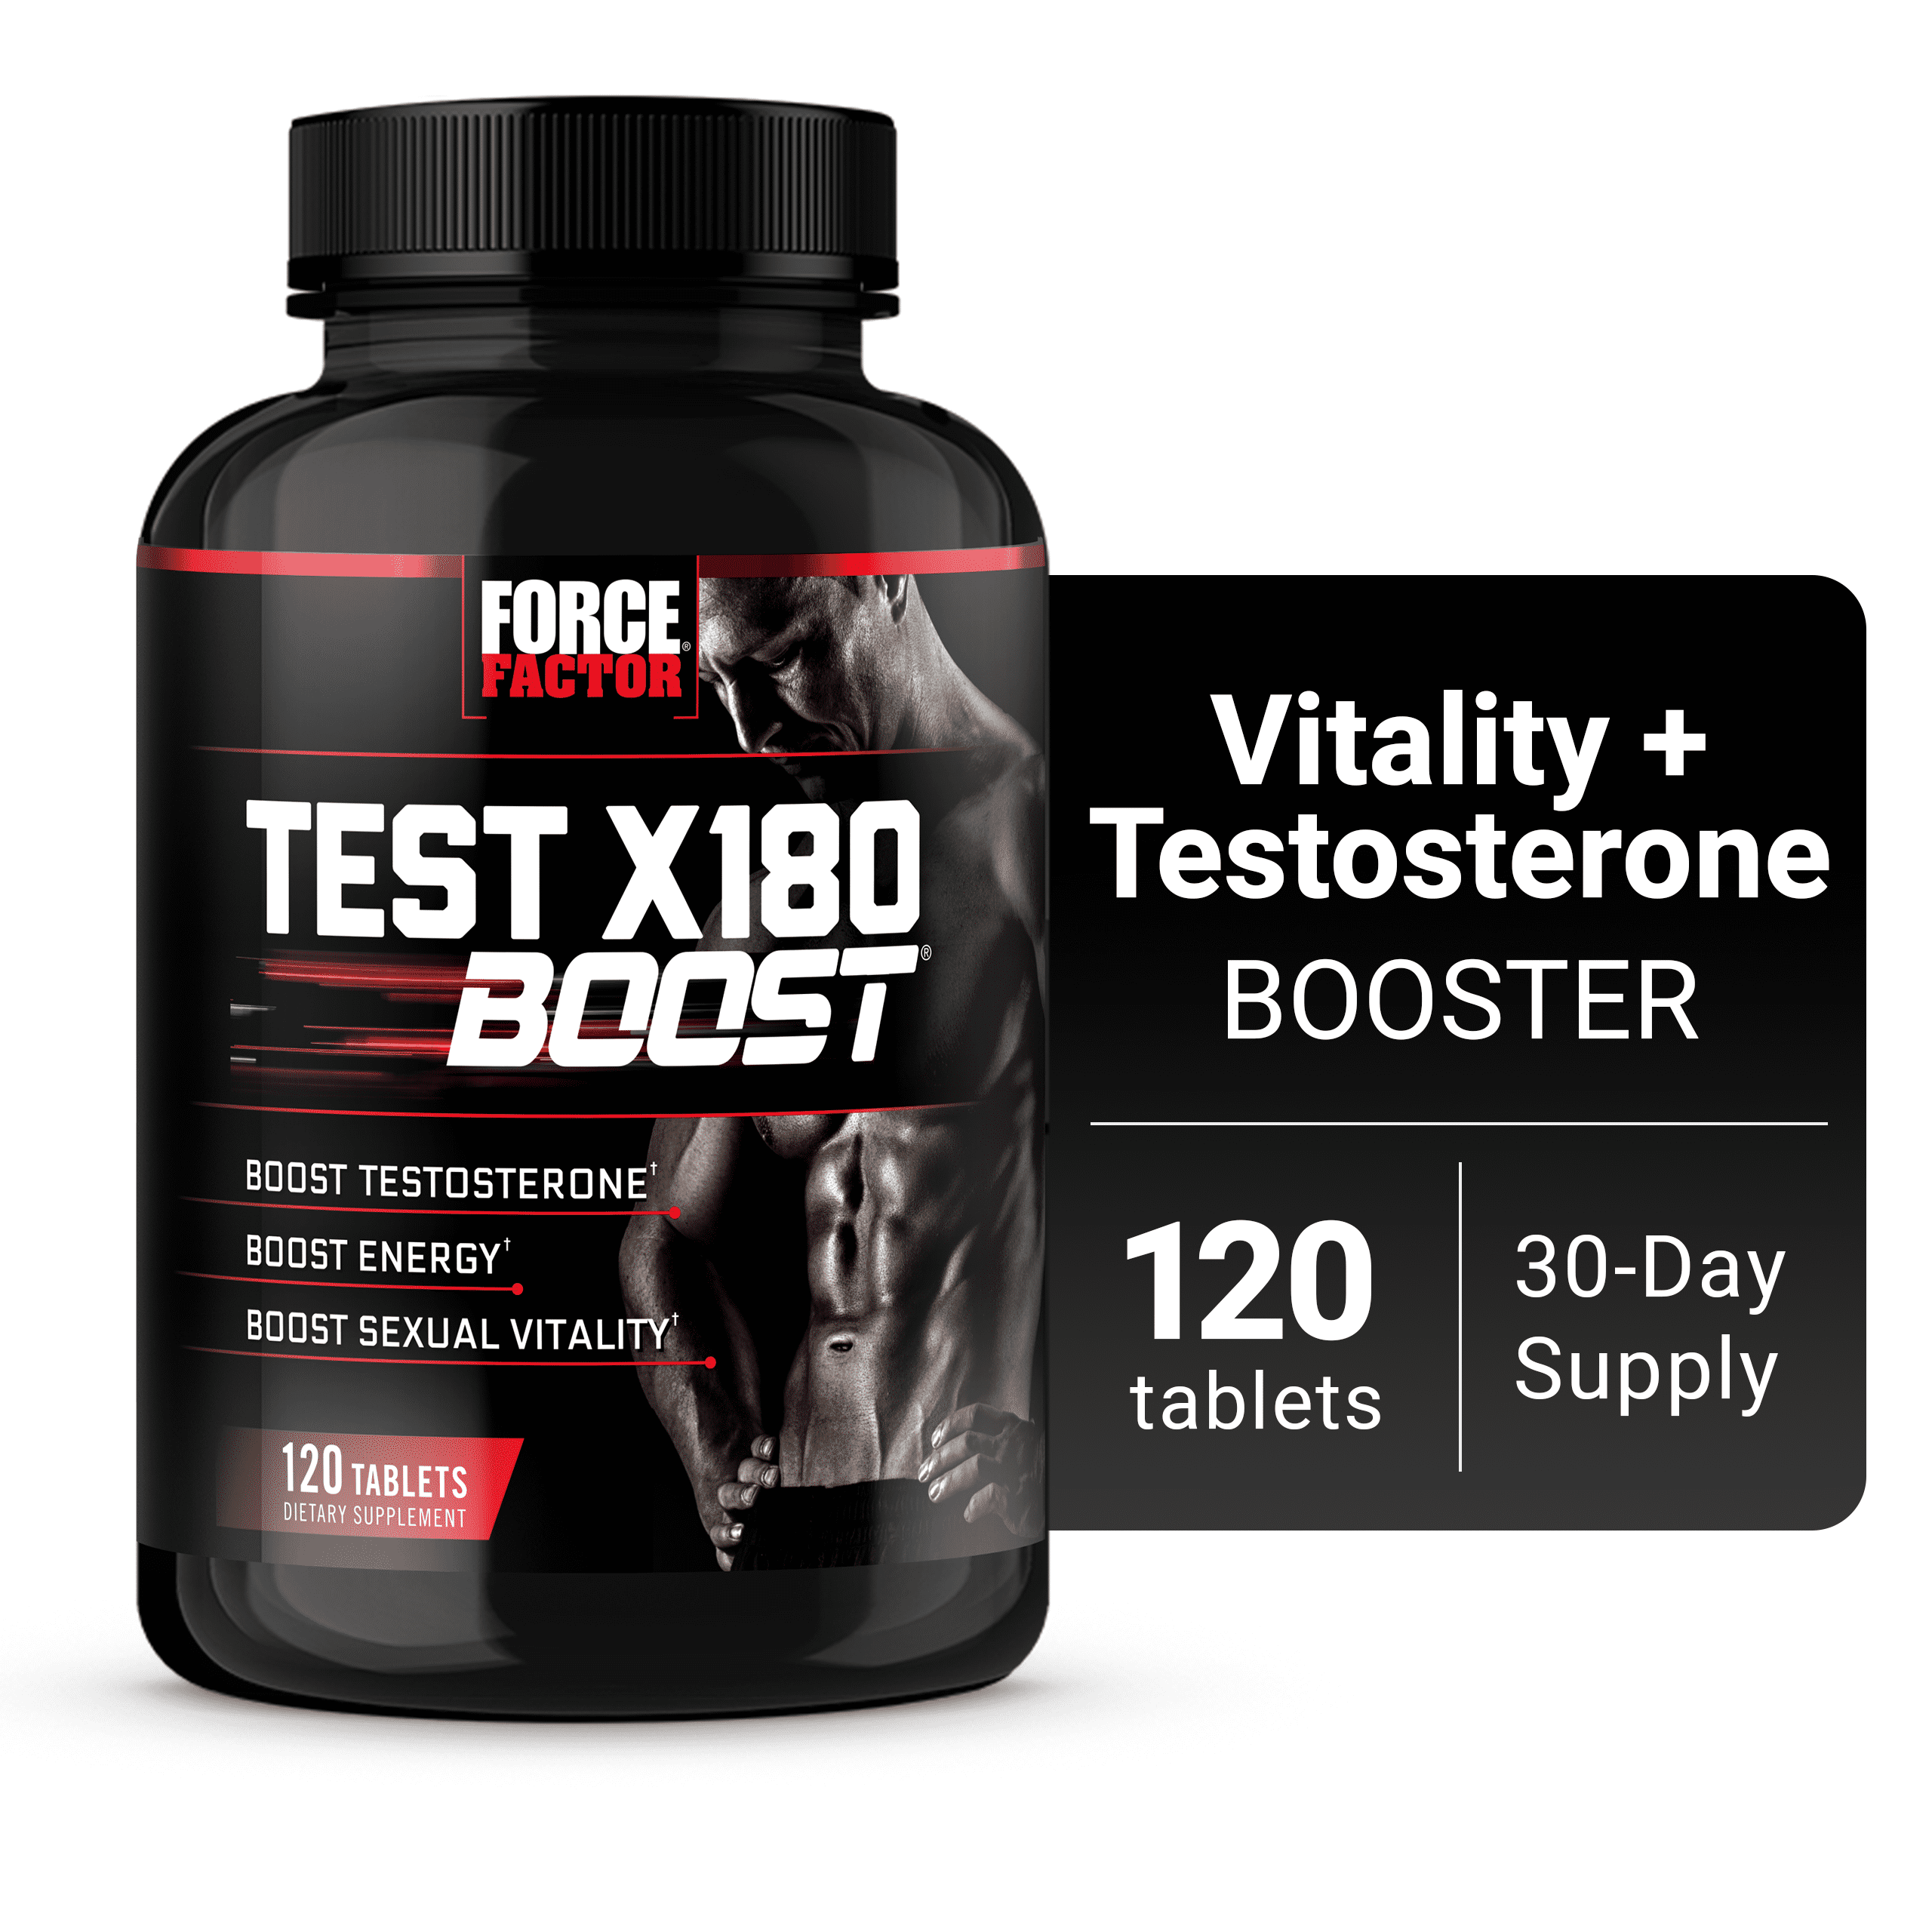 Force Factor Test X180 Boost, Pre-Workout Testosterone Booster, 120 Tablets  